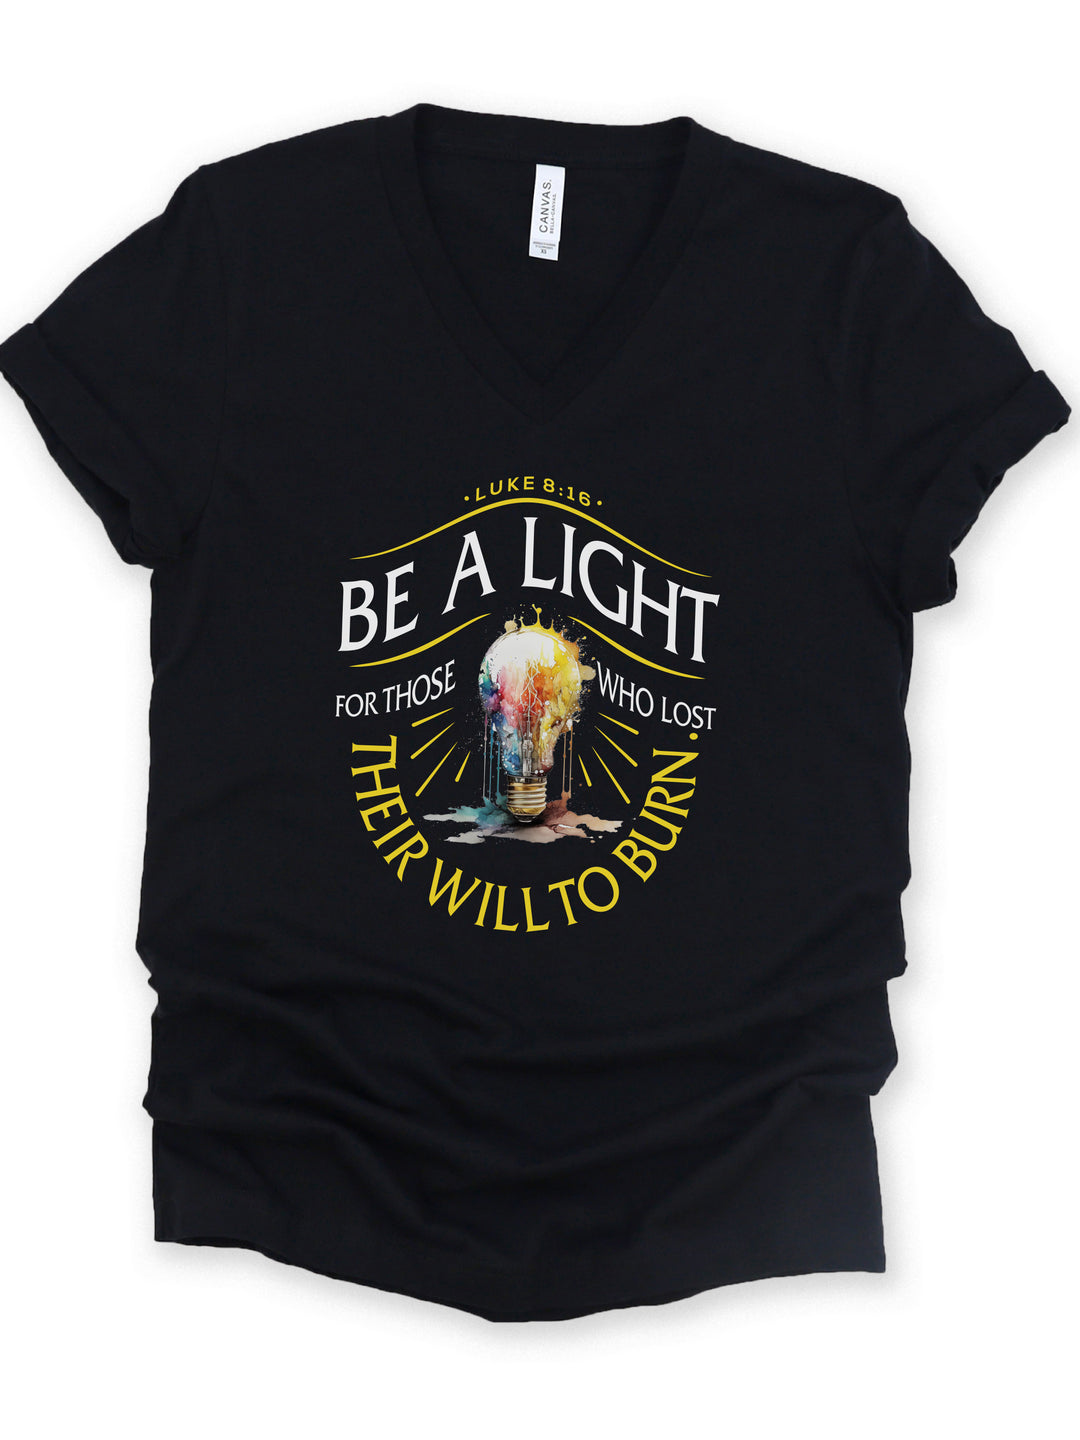 Be A Light For Those Who Lost Their Will To Burn - Unisex V-Neck Tee